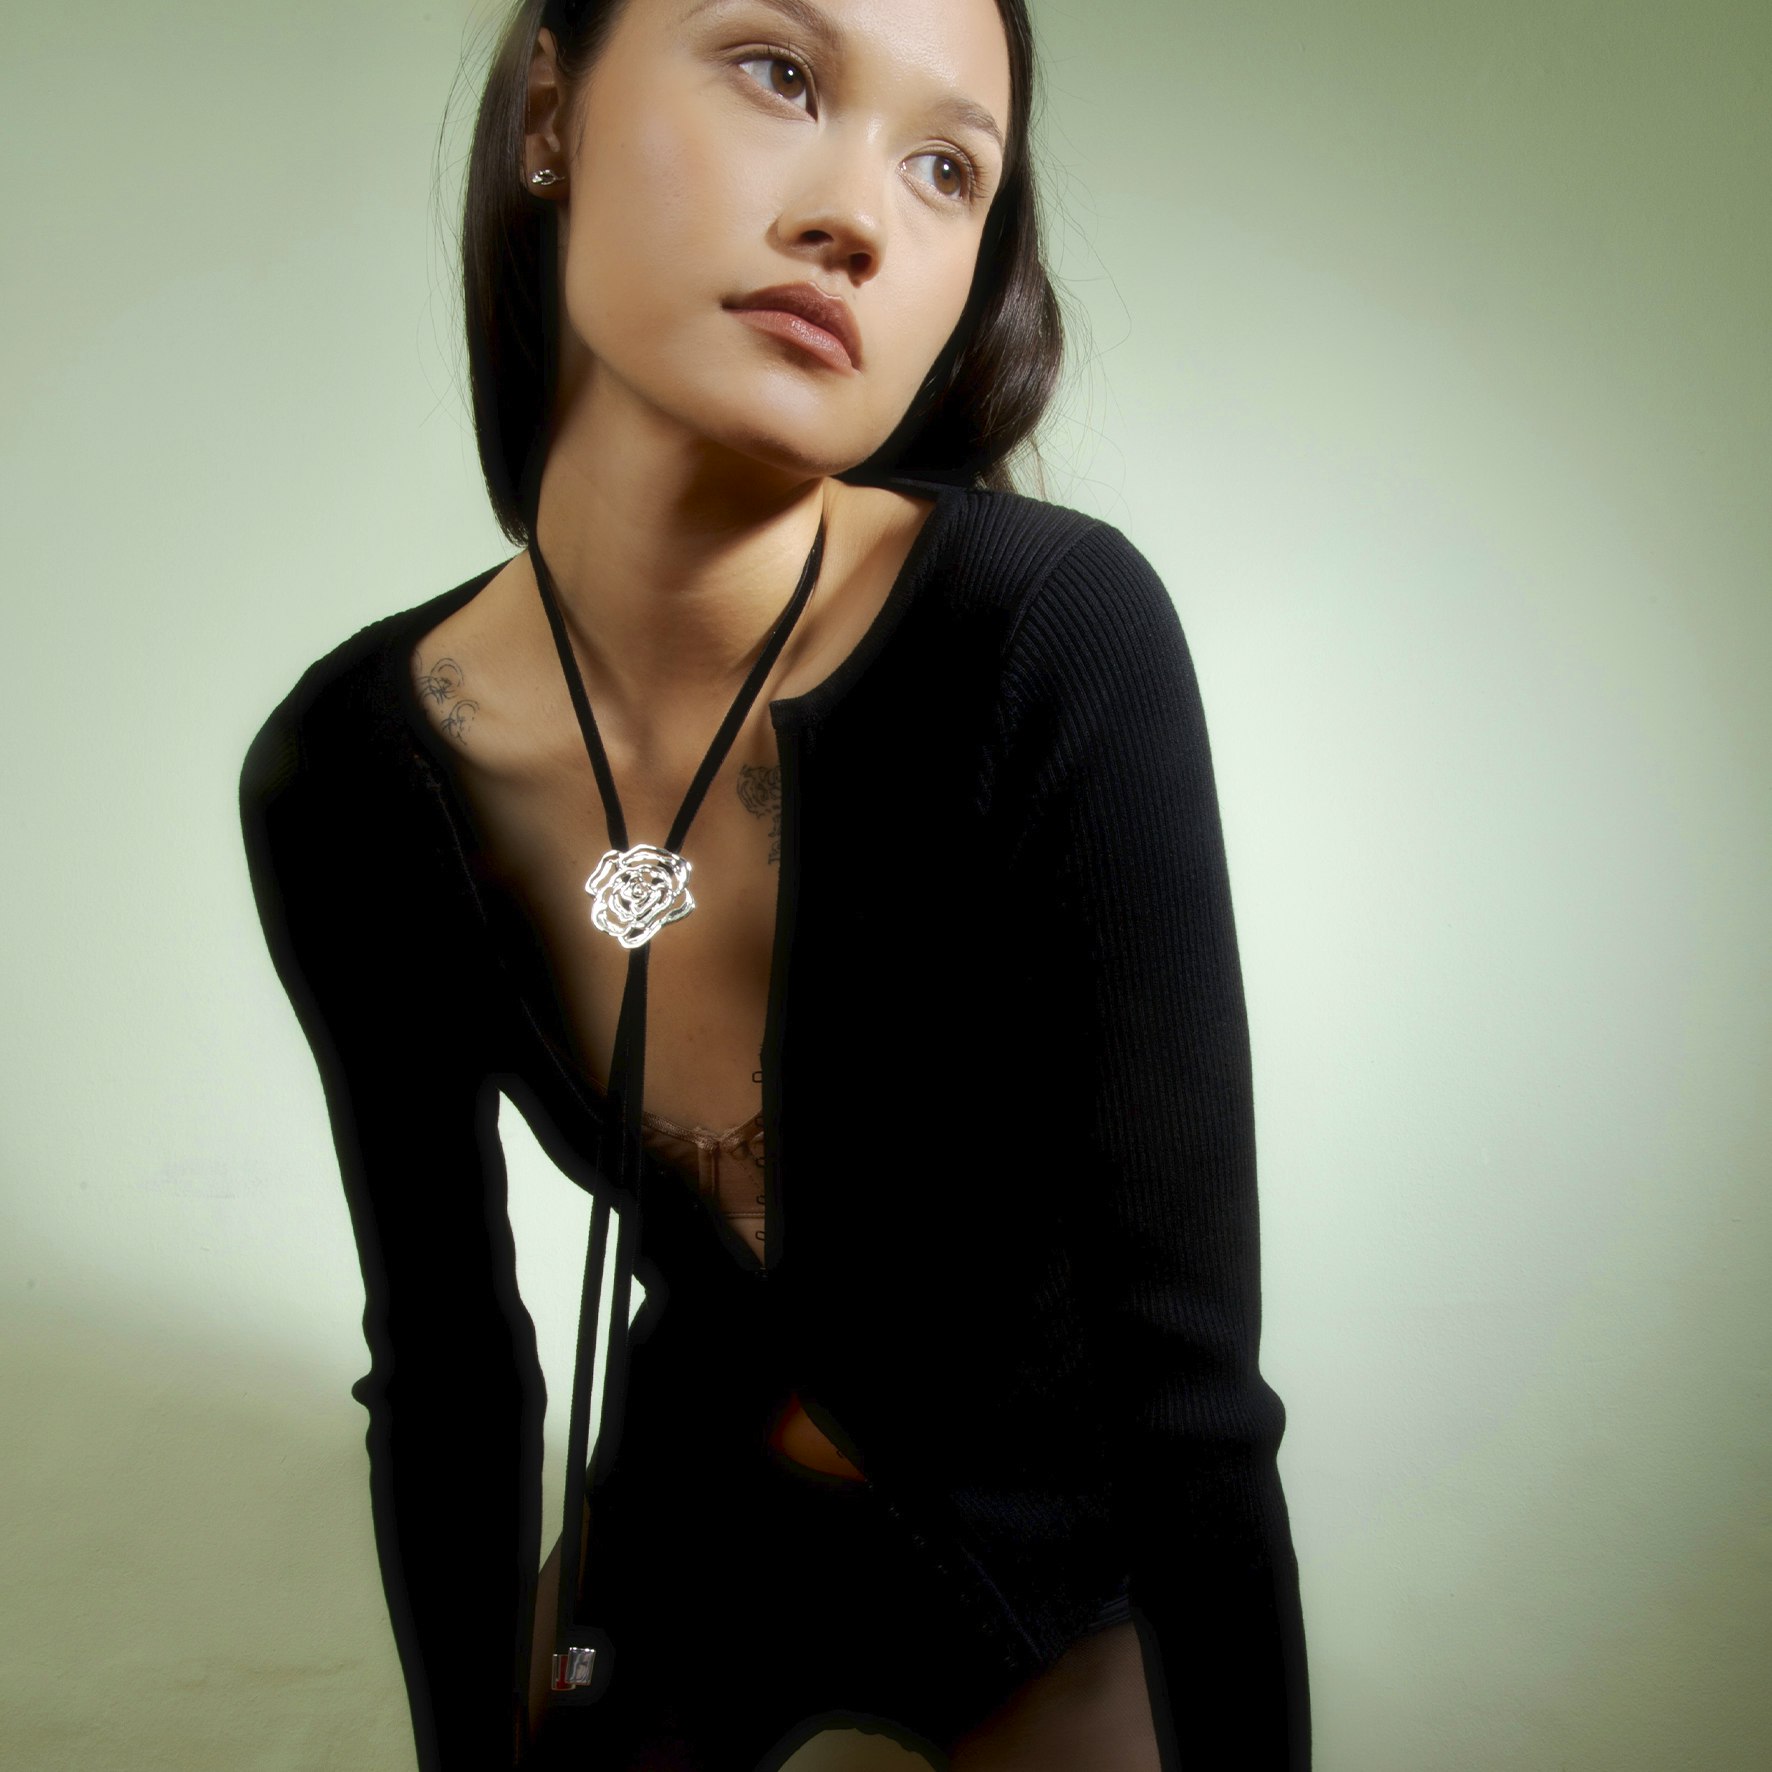 Rosle Bolo Tie Necklace from Jane Kønig in Silver Sterling 925